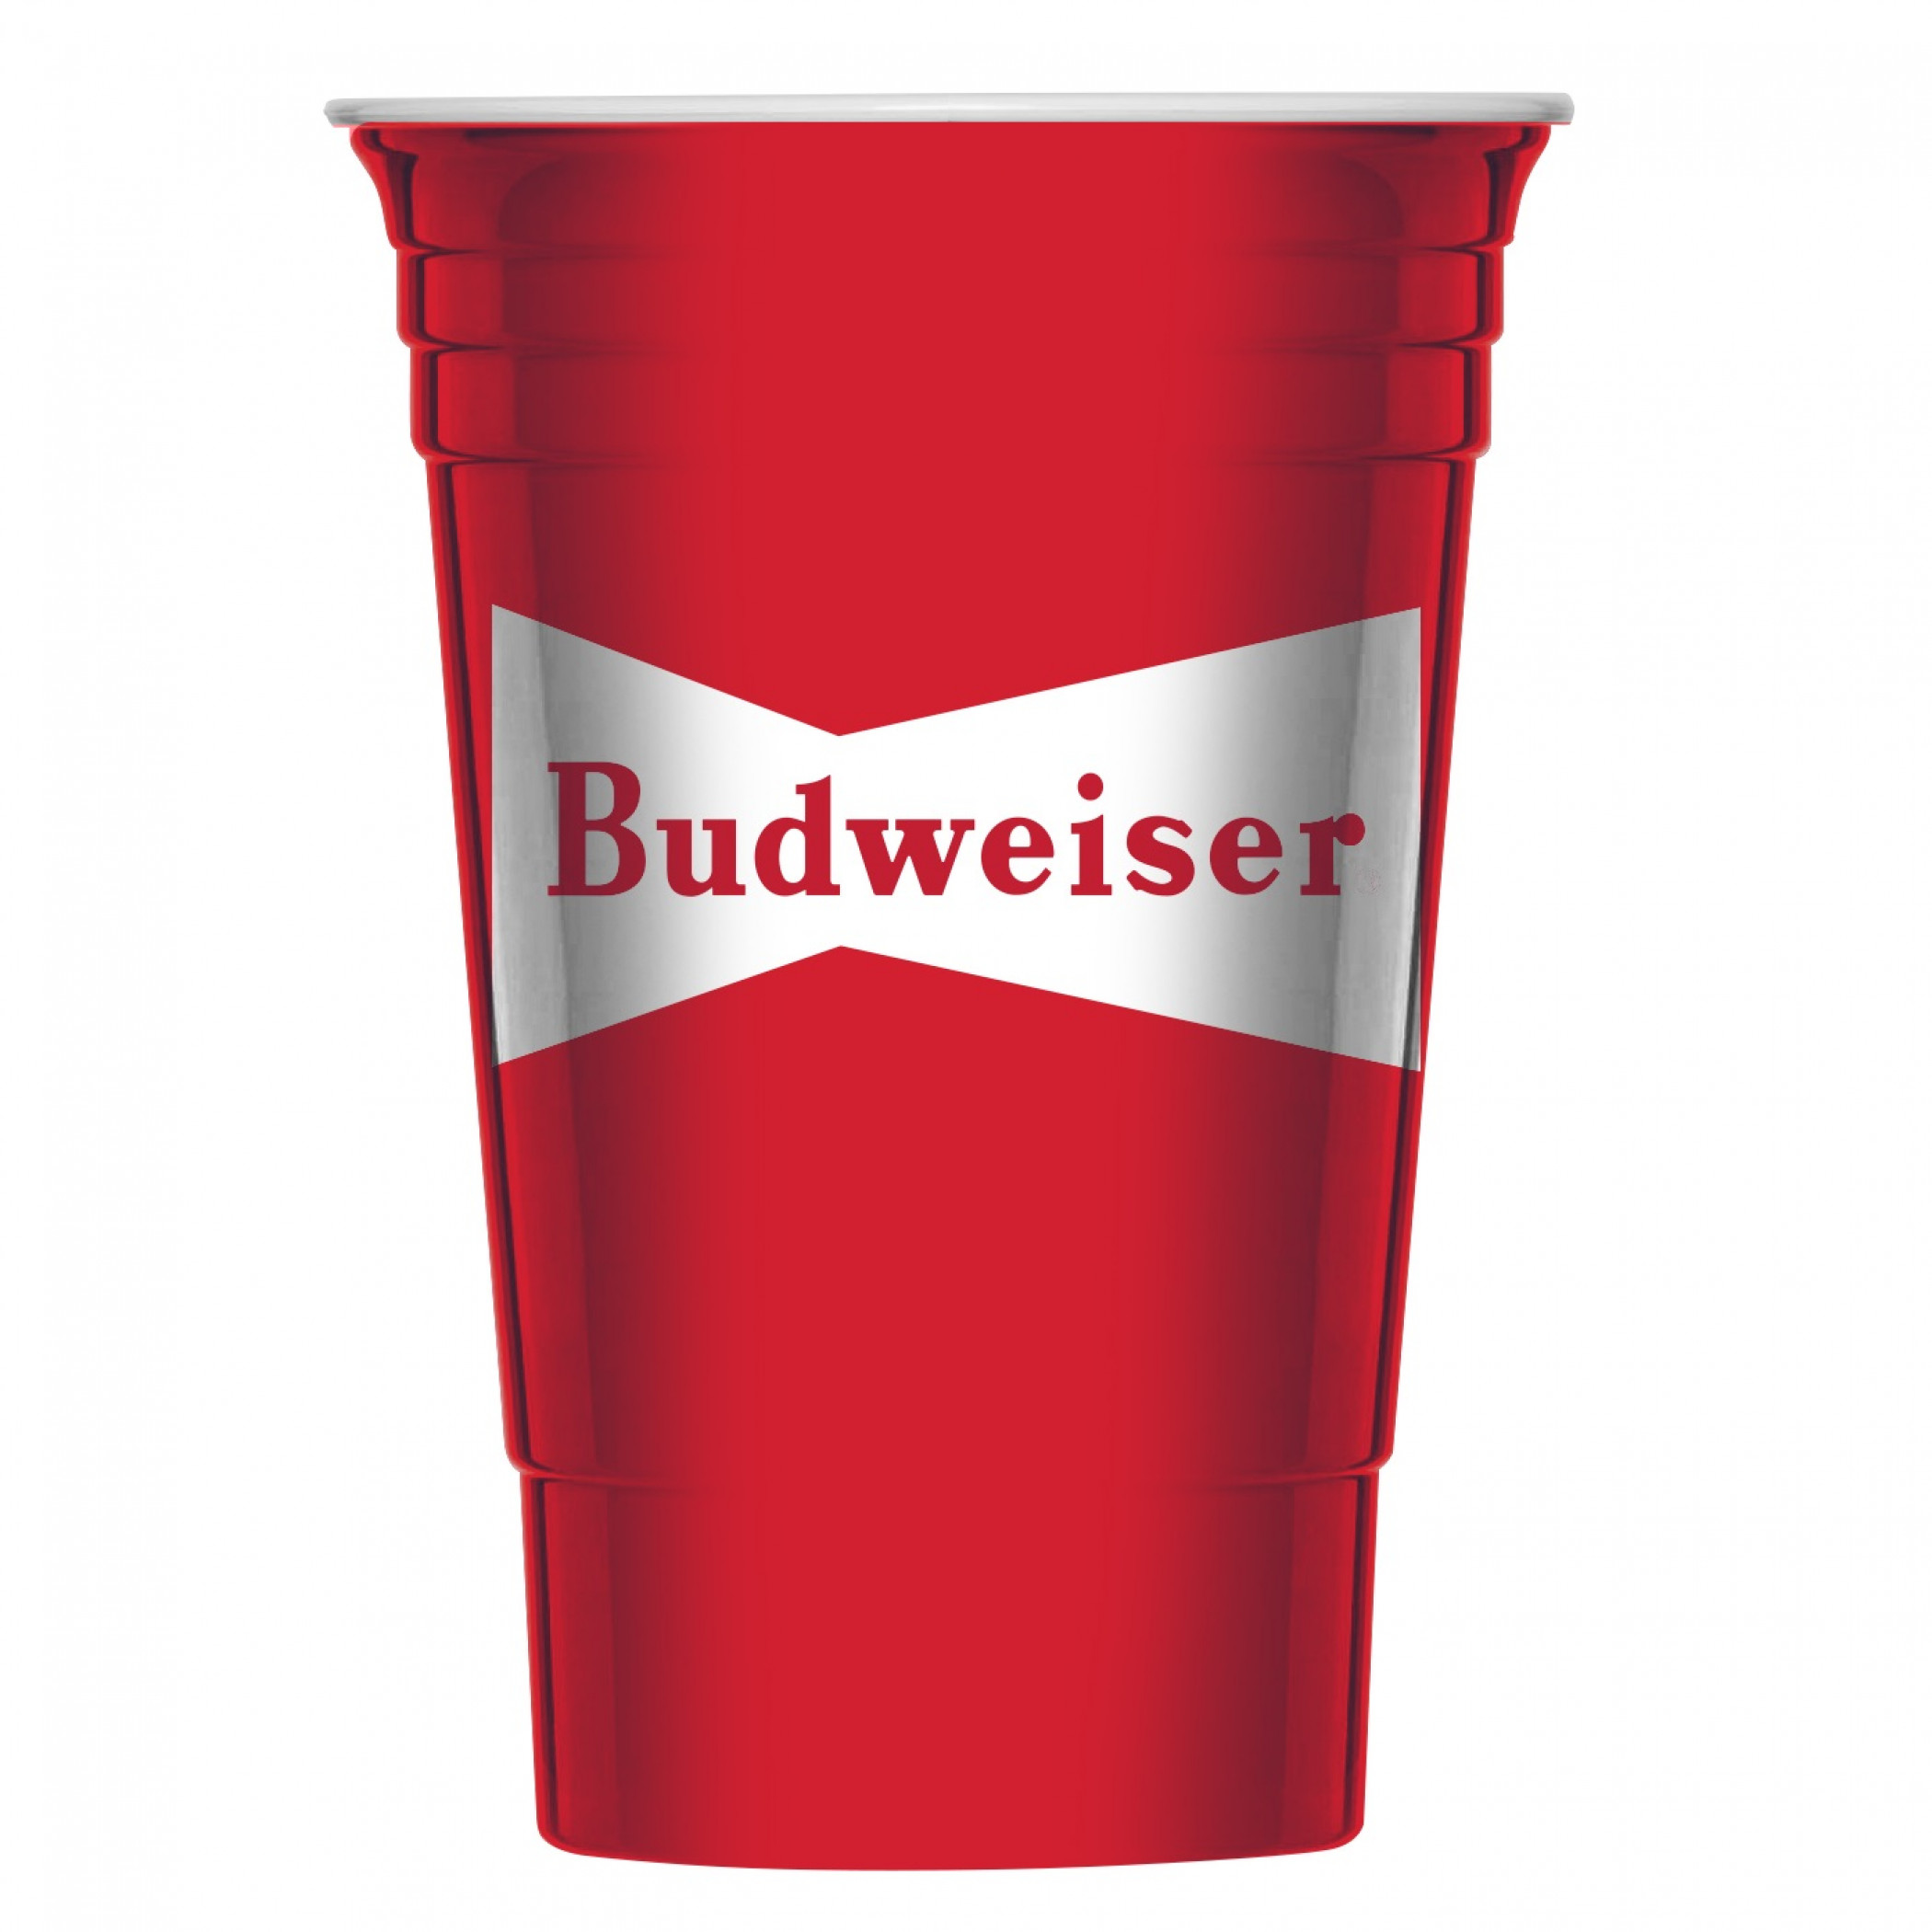 https://mmv2api.s3.us-east-2.amazonaws.com/products/images/Copy%20of%20Budweiser%20Red%20with%20White%20Bow.jpg